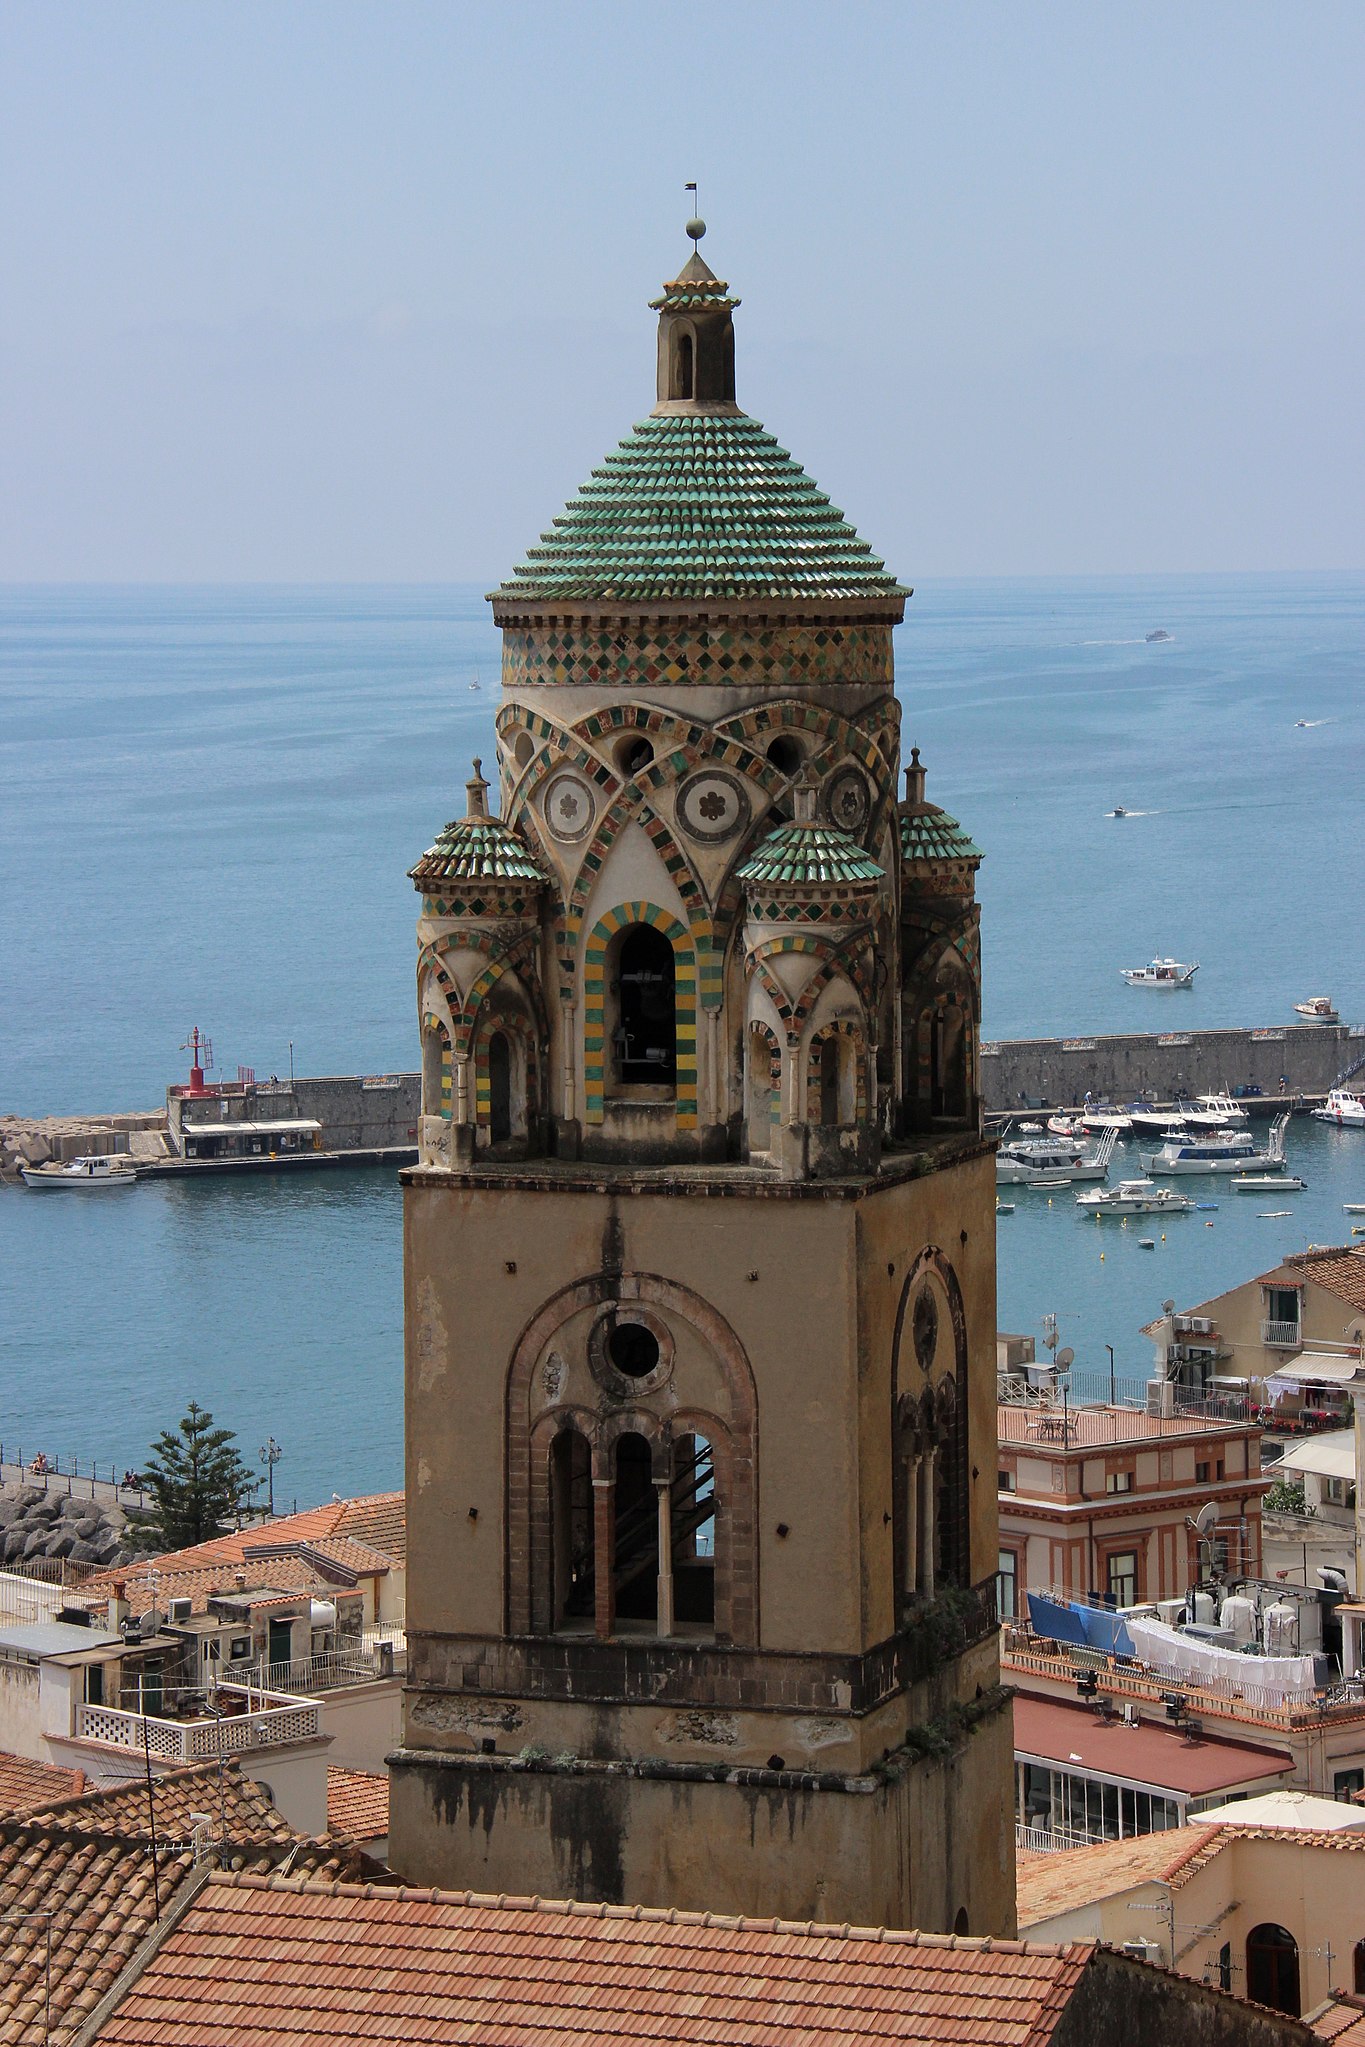 The bell tower of the Amalfi Cathedral. Photo: Miguel Hermoso Cuesta